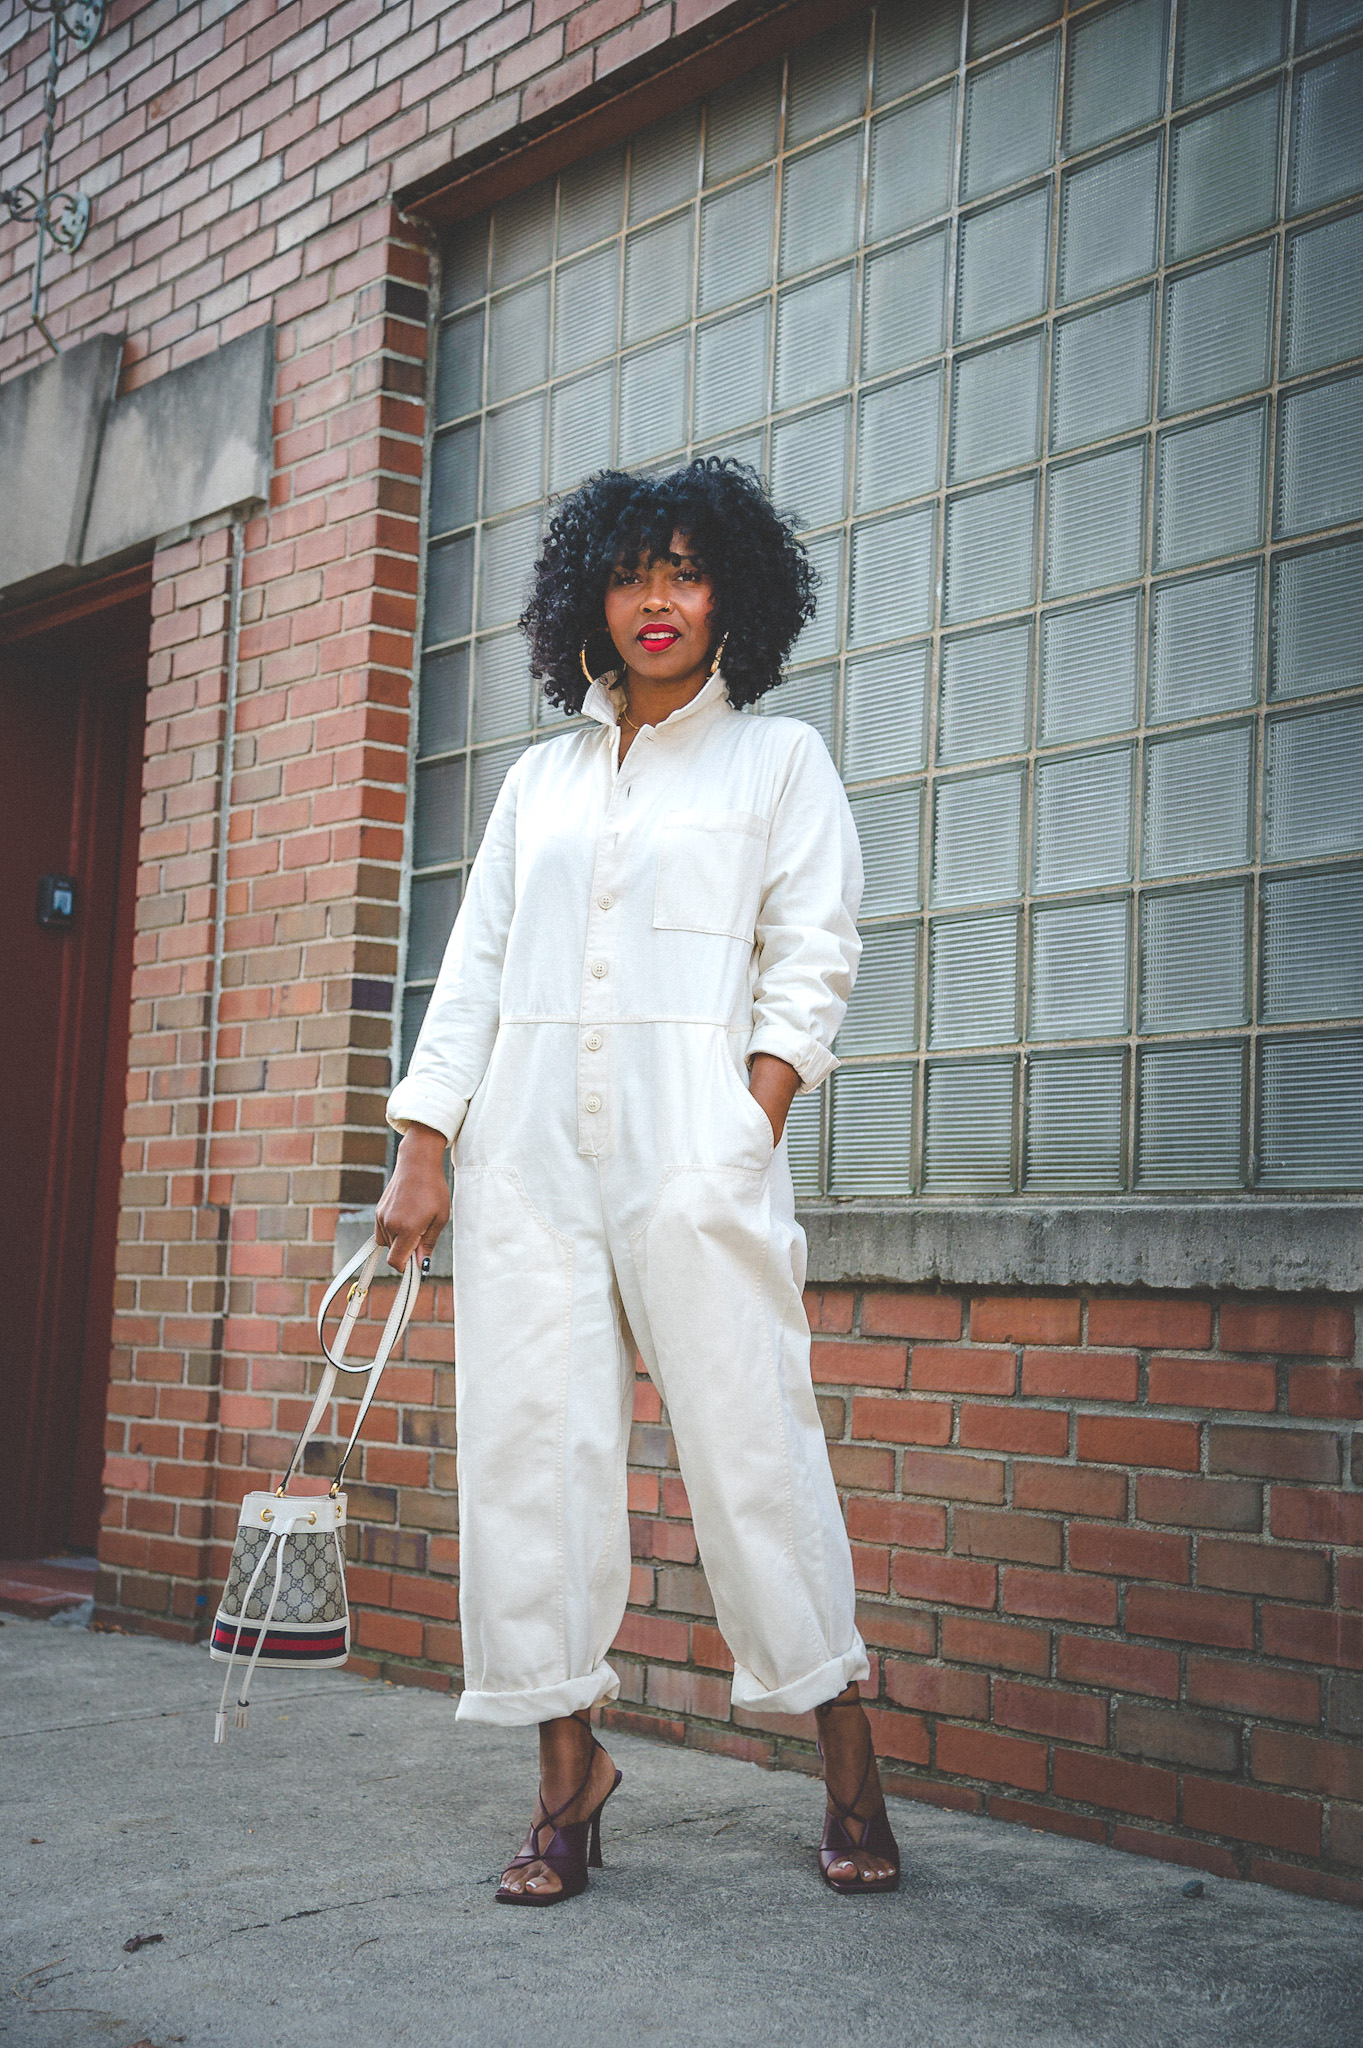 SWEENEE STYLE, HOW TO DRESS FOR HOLIDAY 2022, HOLIDAY 2022 OUTFIT IDEA, FALL 2022 OUTFIT IDEAS, INDIANAPOLIS FASHION BLOG, INDIANA STYLE BLOG, BLACK GIRLS WHO BLOG